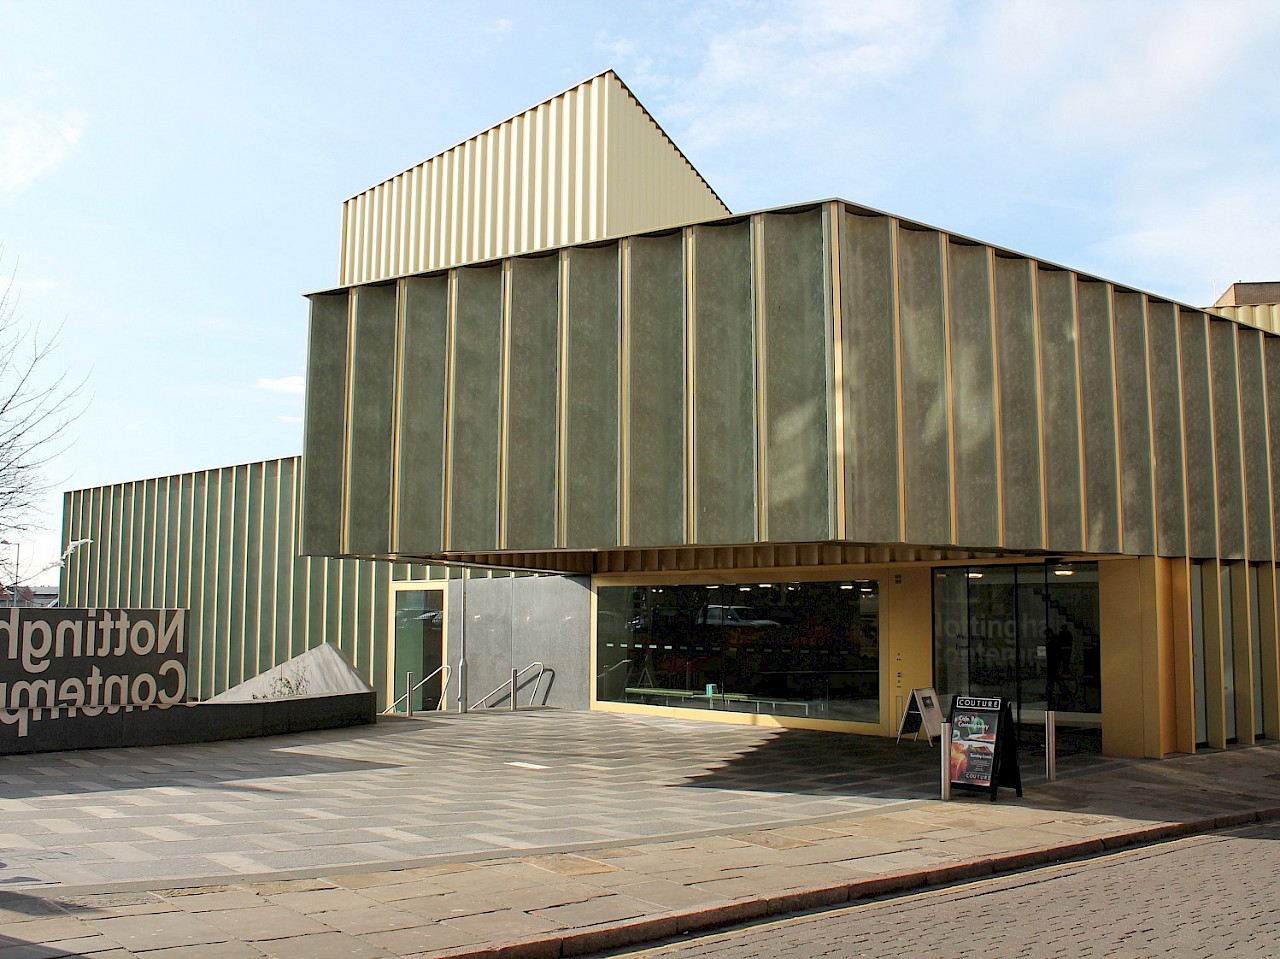 www.nottinghamcontemporary.org